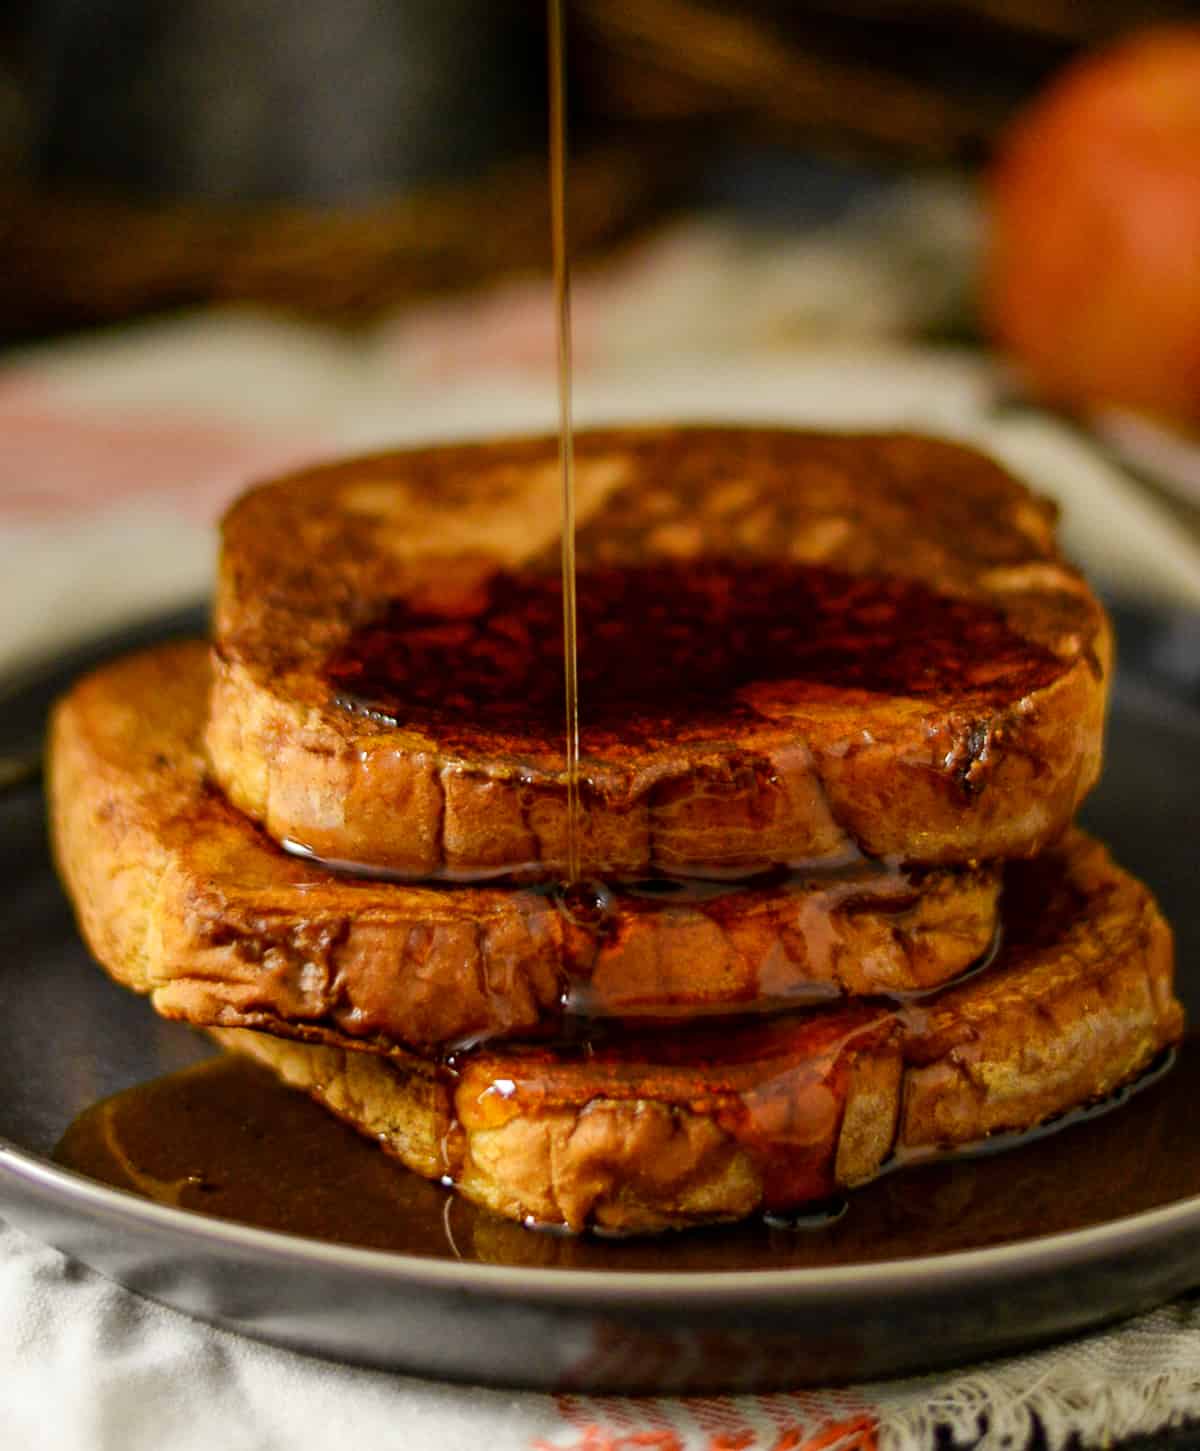 Syrup being poured on top of pumpkin french toast.